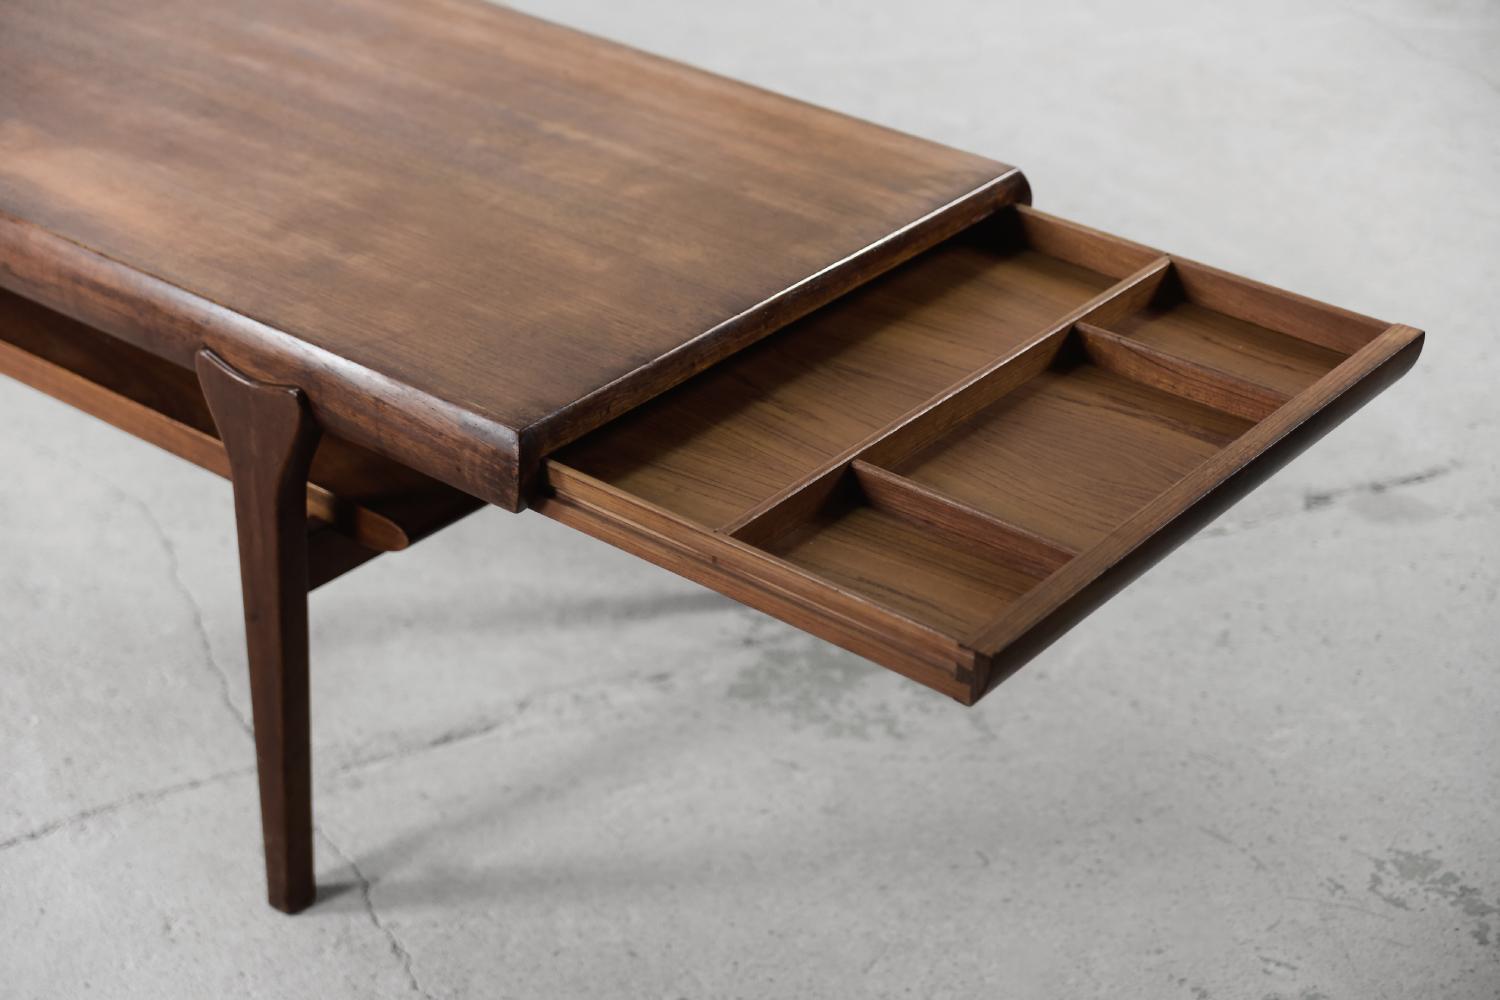 Vintage Mid-century Modern Scandinavian Extendable Teak Coffee Table with Drawer For Sale 3